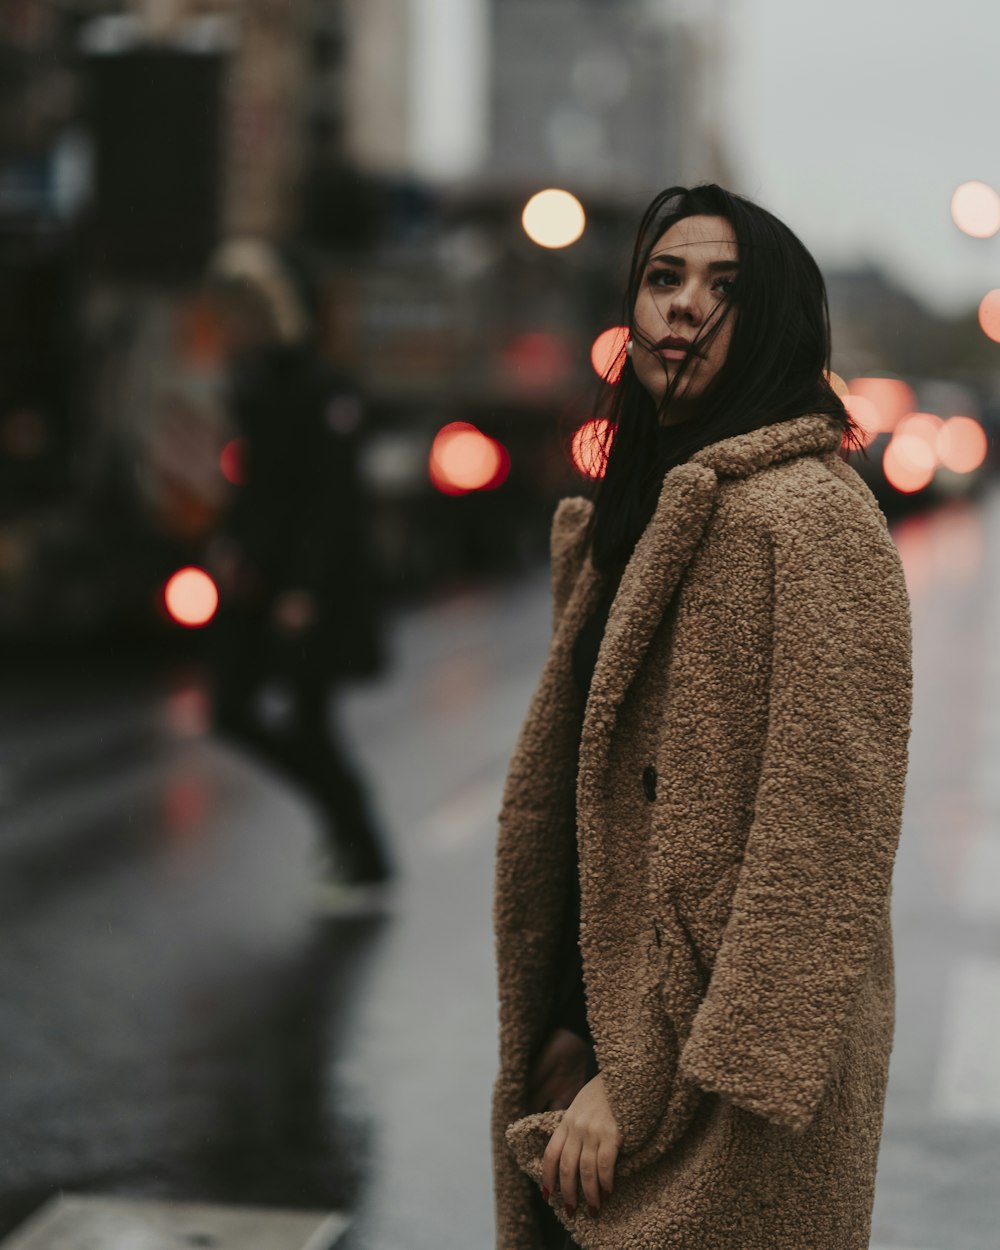 woman in brown coat standing on street during night time